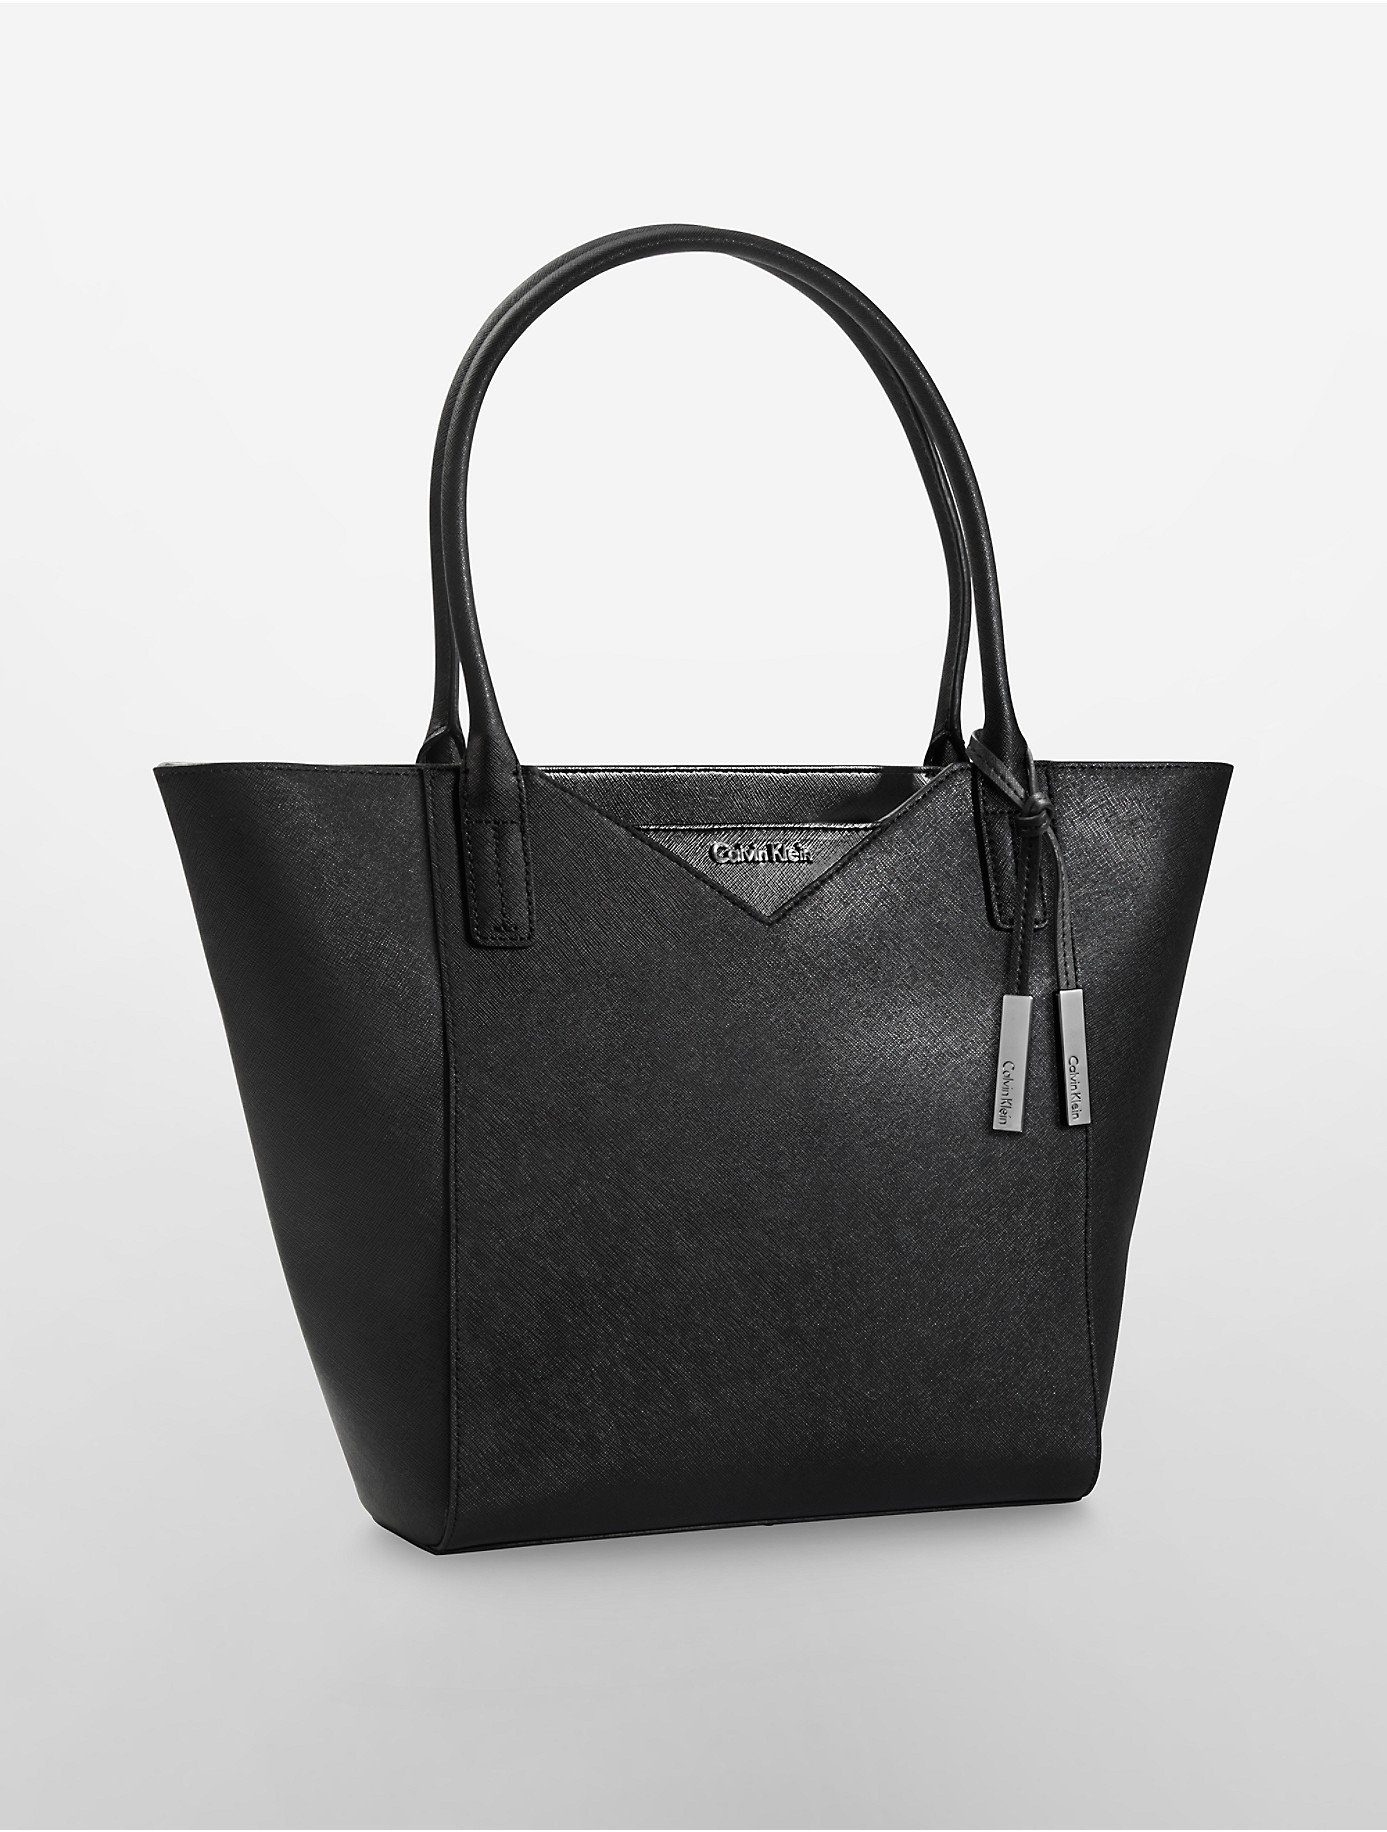 Lyst - Calvin Klein White Label Saffiano Leather Large Winged Tote Bag ...